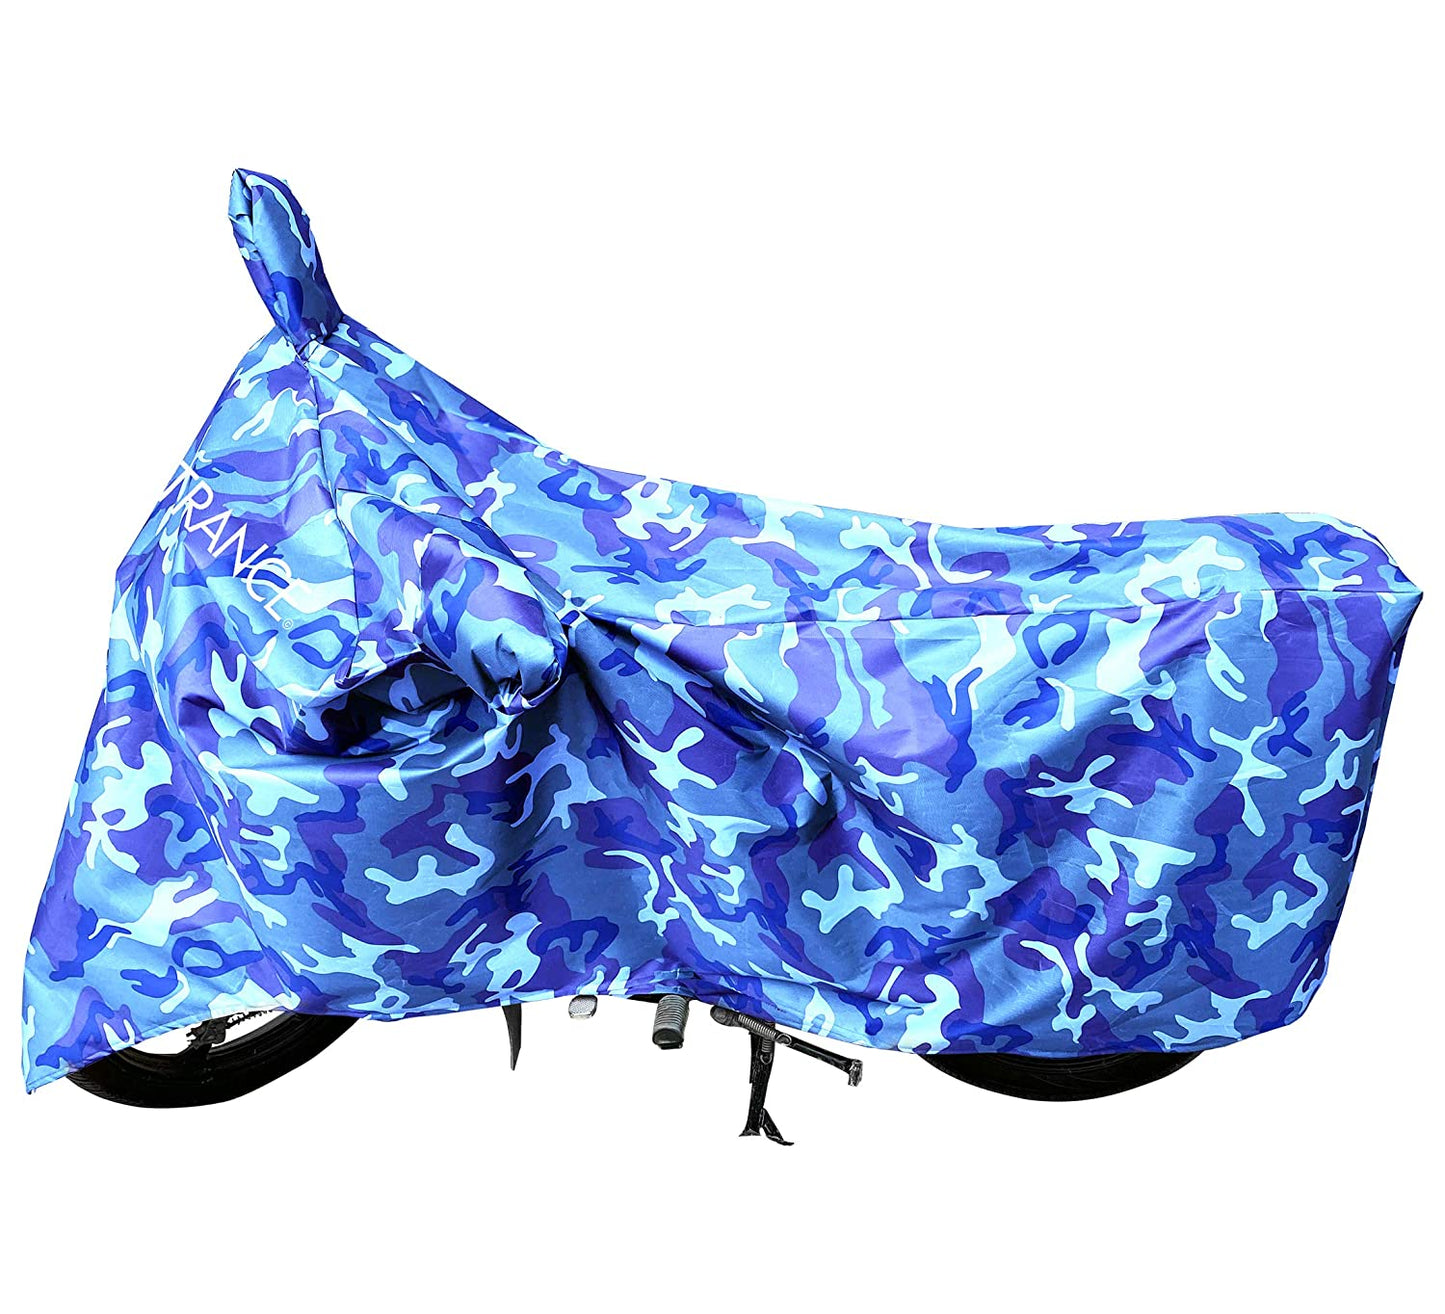 MotoTrance Jungle Bike Body Covers For Hero Splendor Pro - Interlock-Stitched Waterproof and Heat Resistant with Mirror Pockets